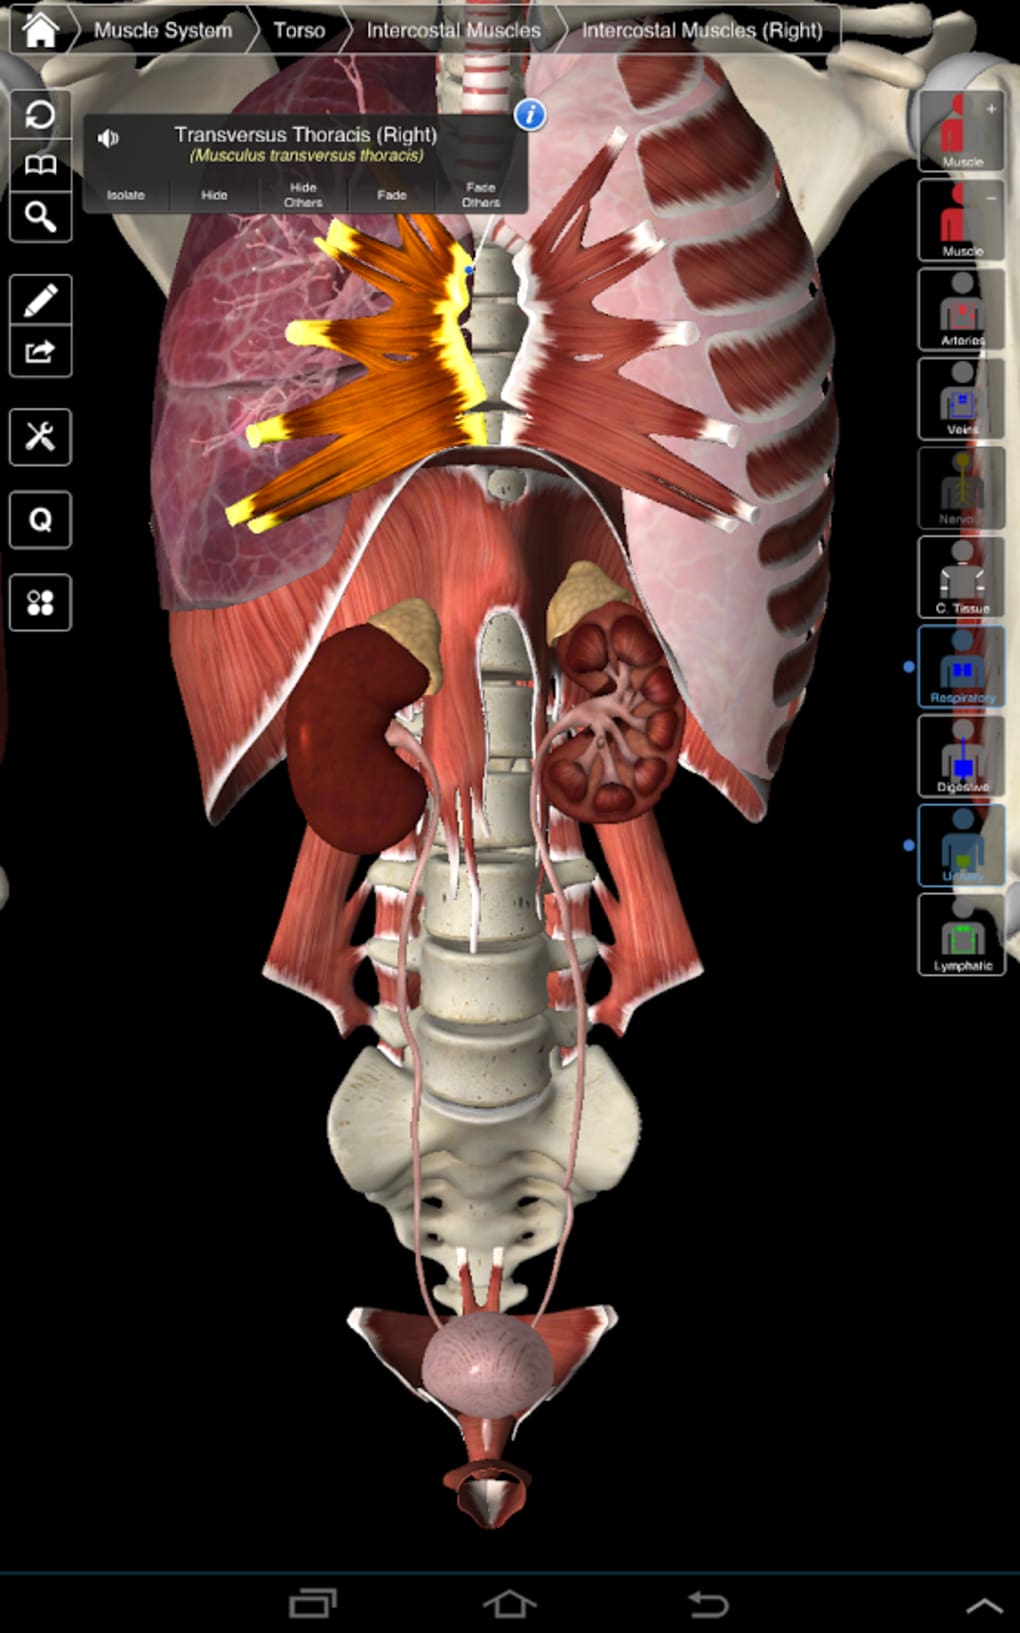 difference between essential anatomy 5 app for linex